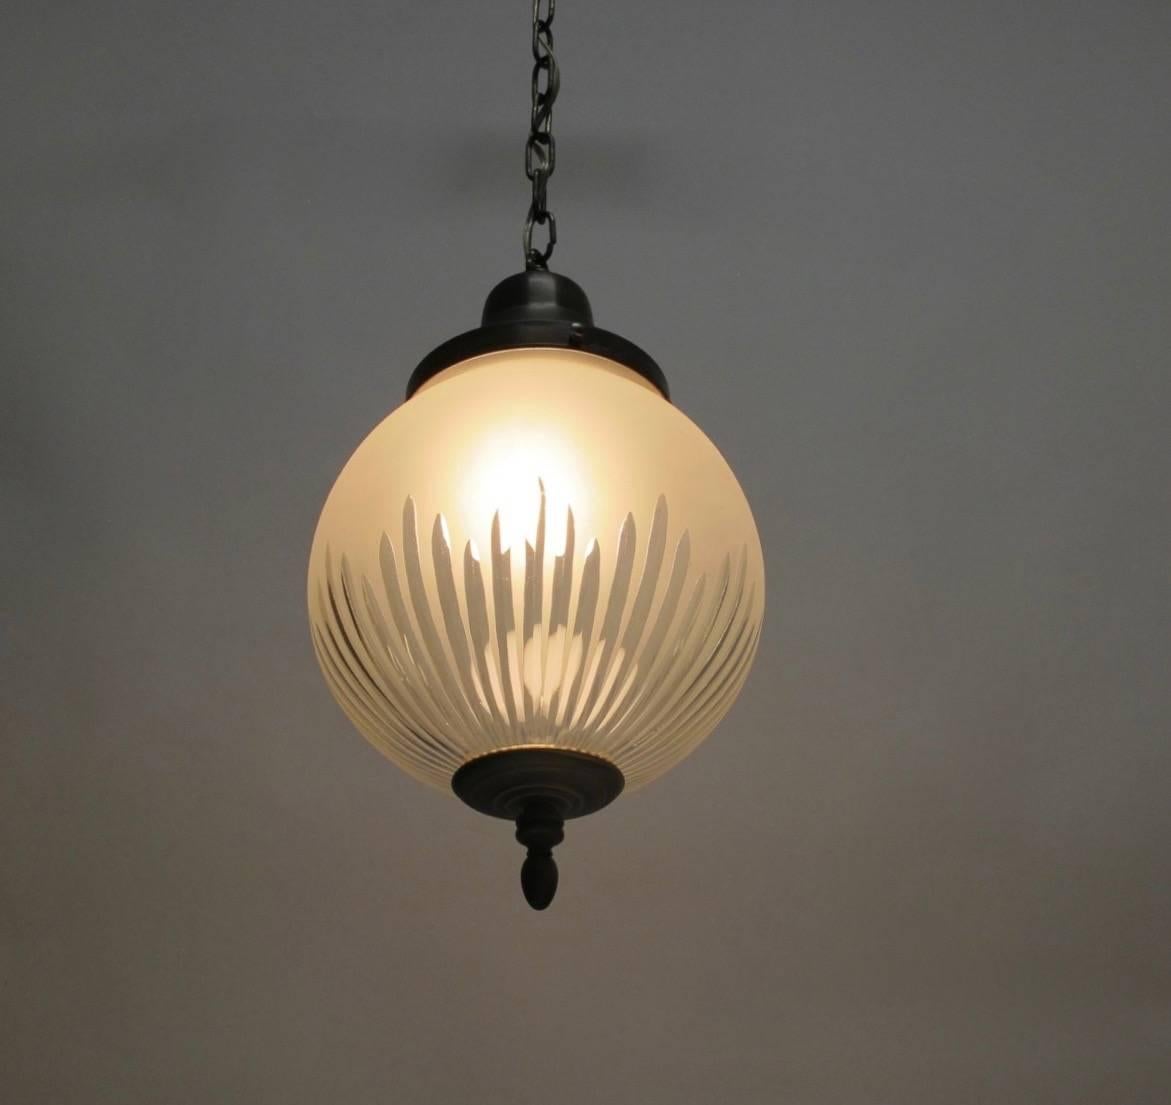 Hanging frosted and cut glass pendant orb light fixture with a single bulb having patinated bronze finish on the fittings and with a bronze finished canopy. Newly re-wired, chain can be adjusted to desired length. American, early 20th century.